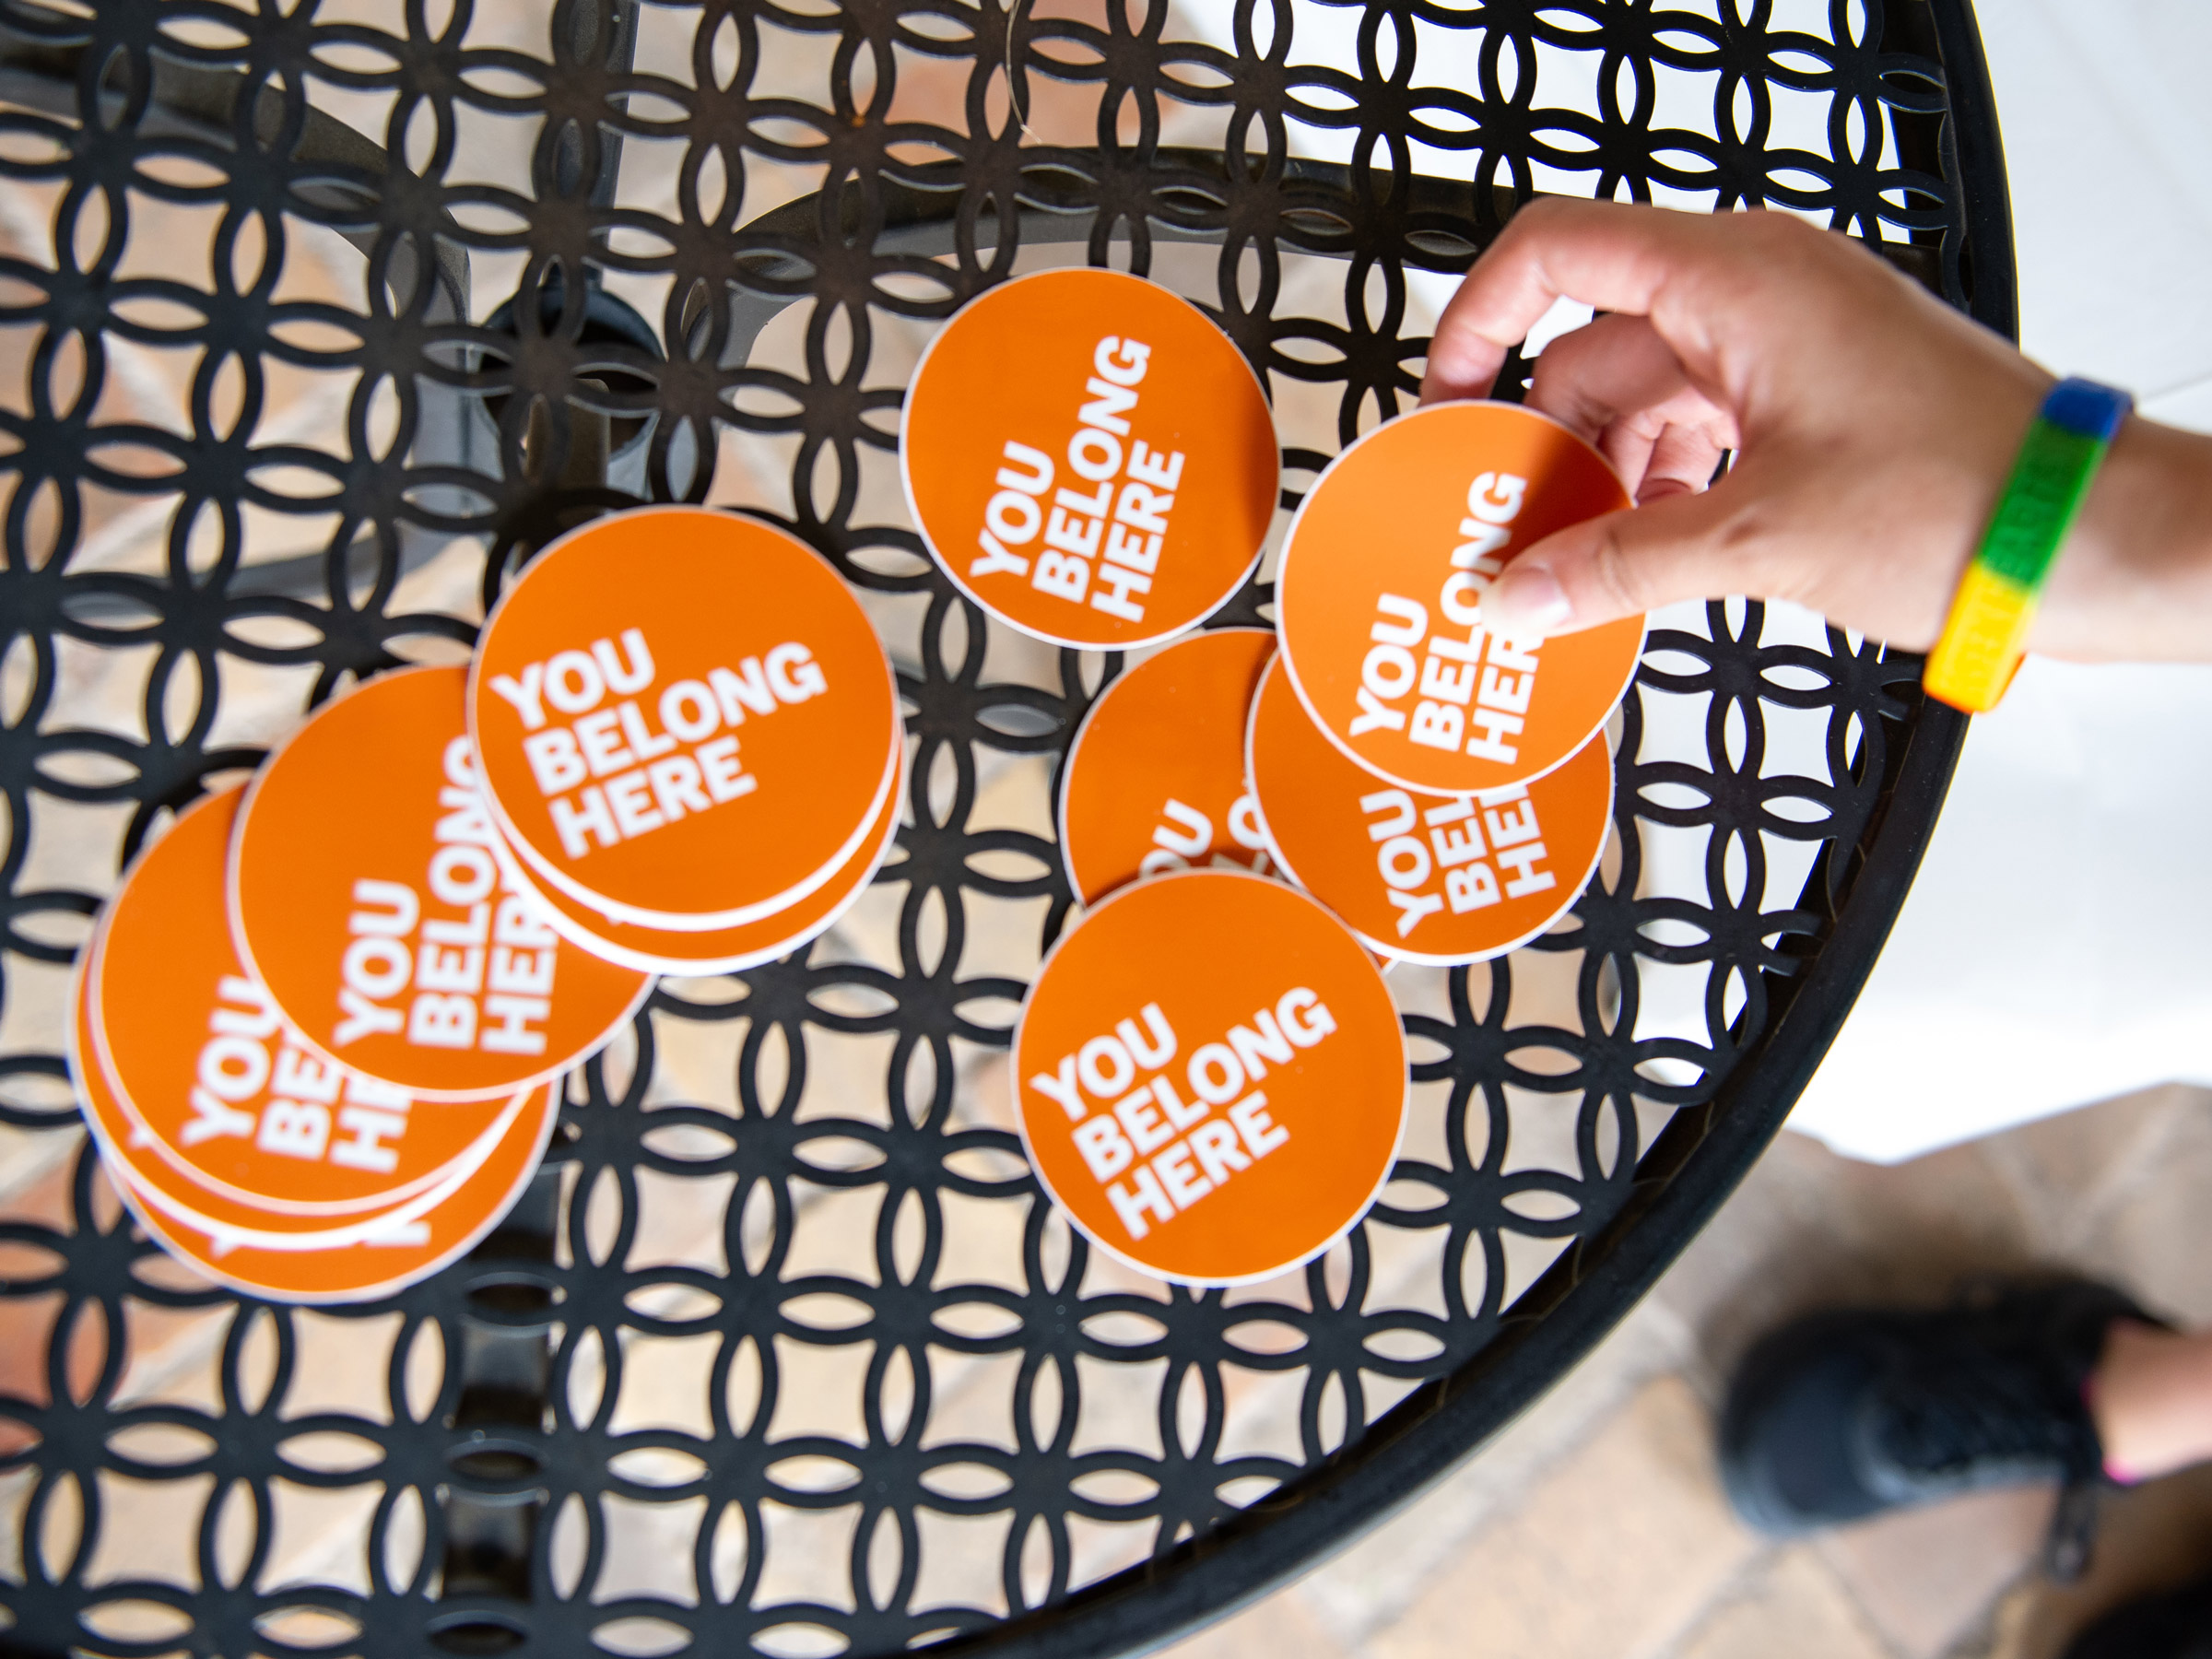 A close-up photo of stickers on a table that read "You Belong Here."